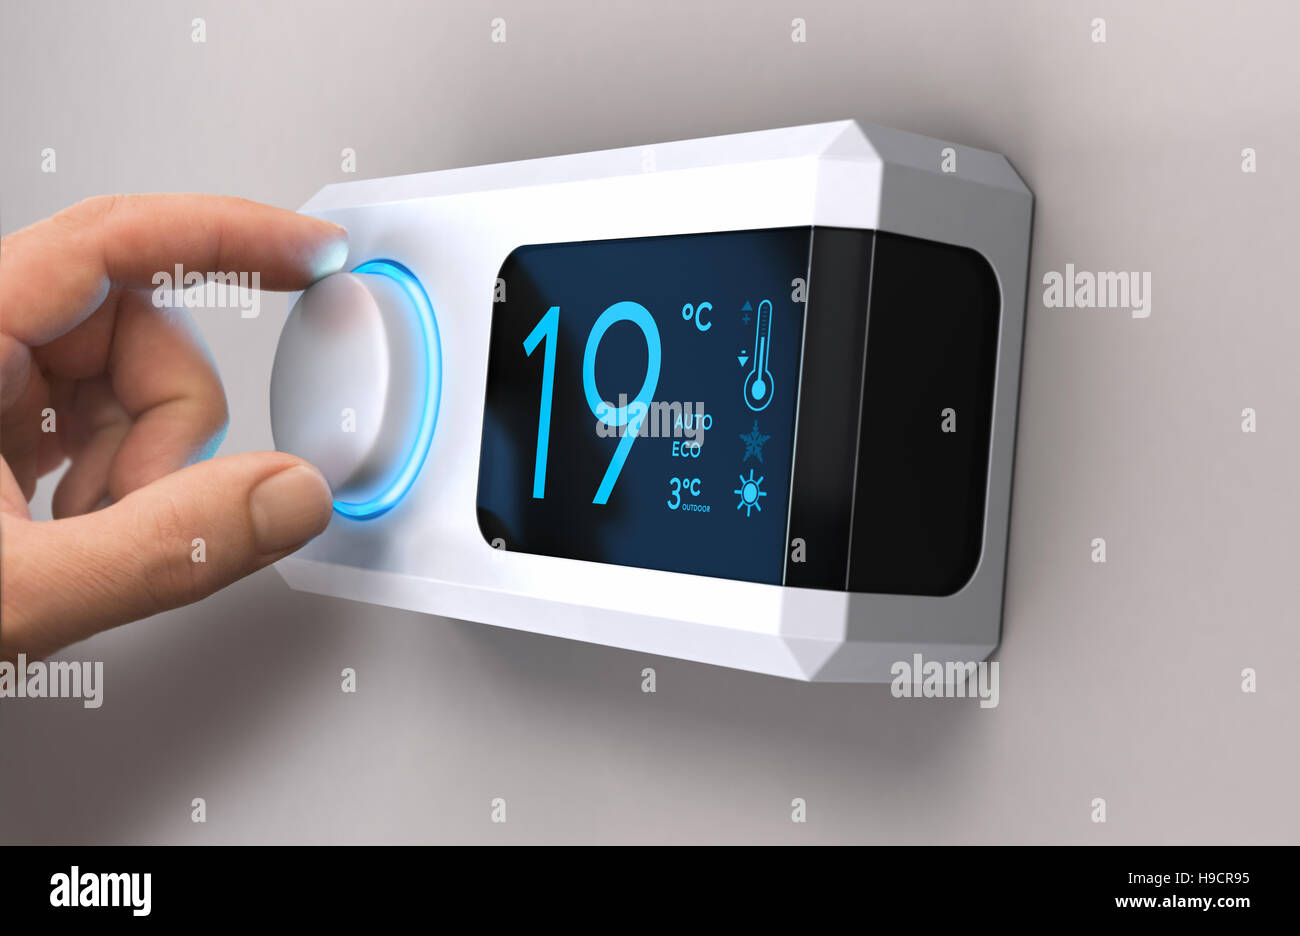 Hand turning a home thermostat knob to set temperature on energy saving mode. celcius units. Composite image between a photography and a 3D background Stock Photo